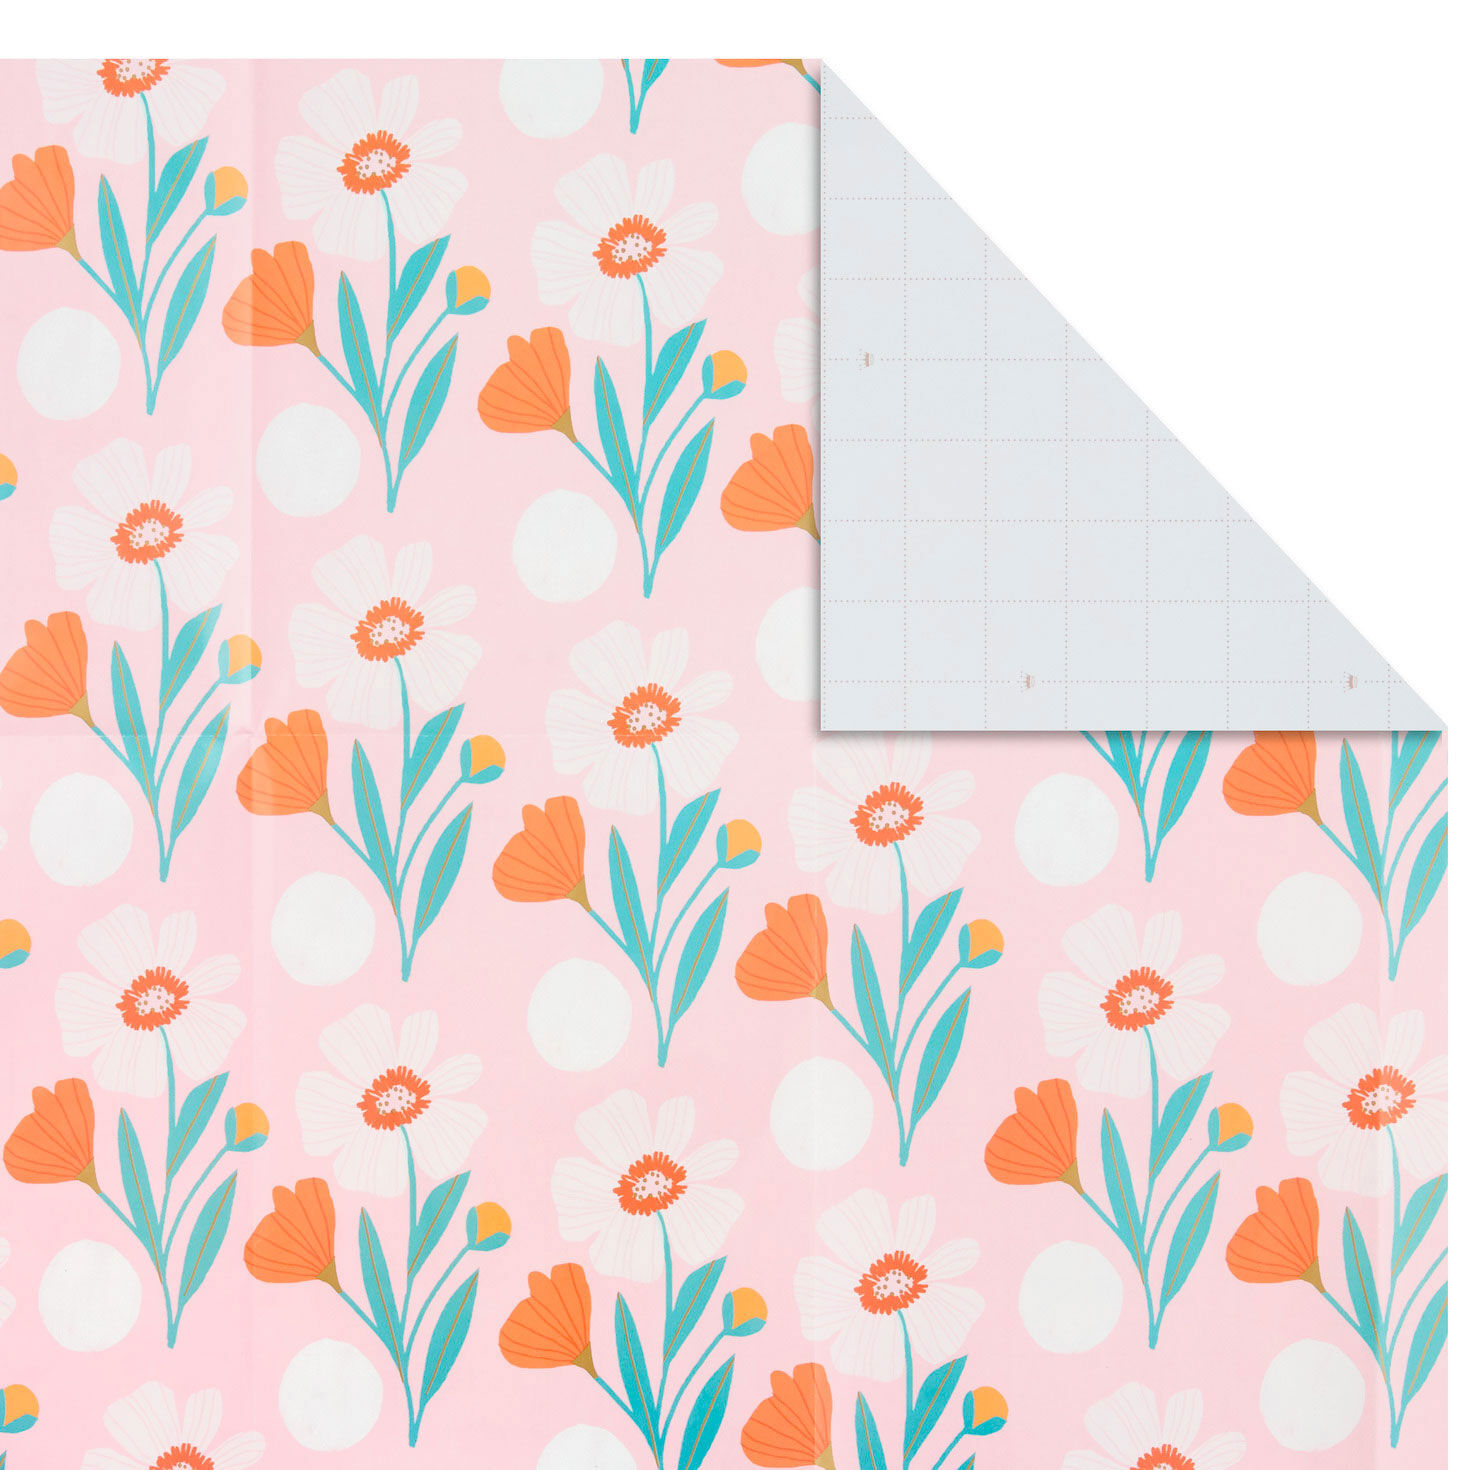 Pink Floral Flat Wrapping Paper With Gift Tags, 3 sheets - Wrapping Paper -  Hallmark